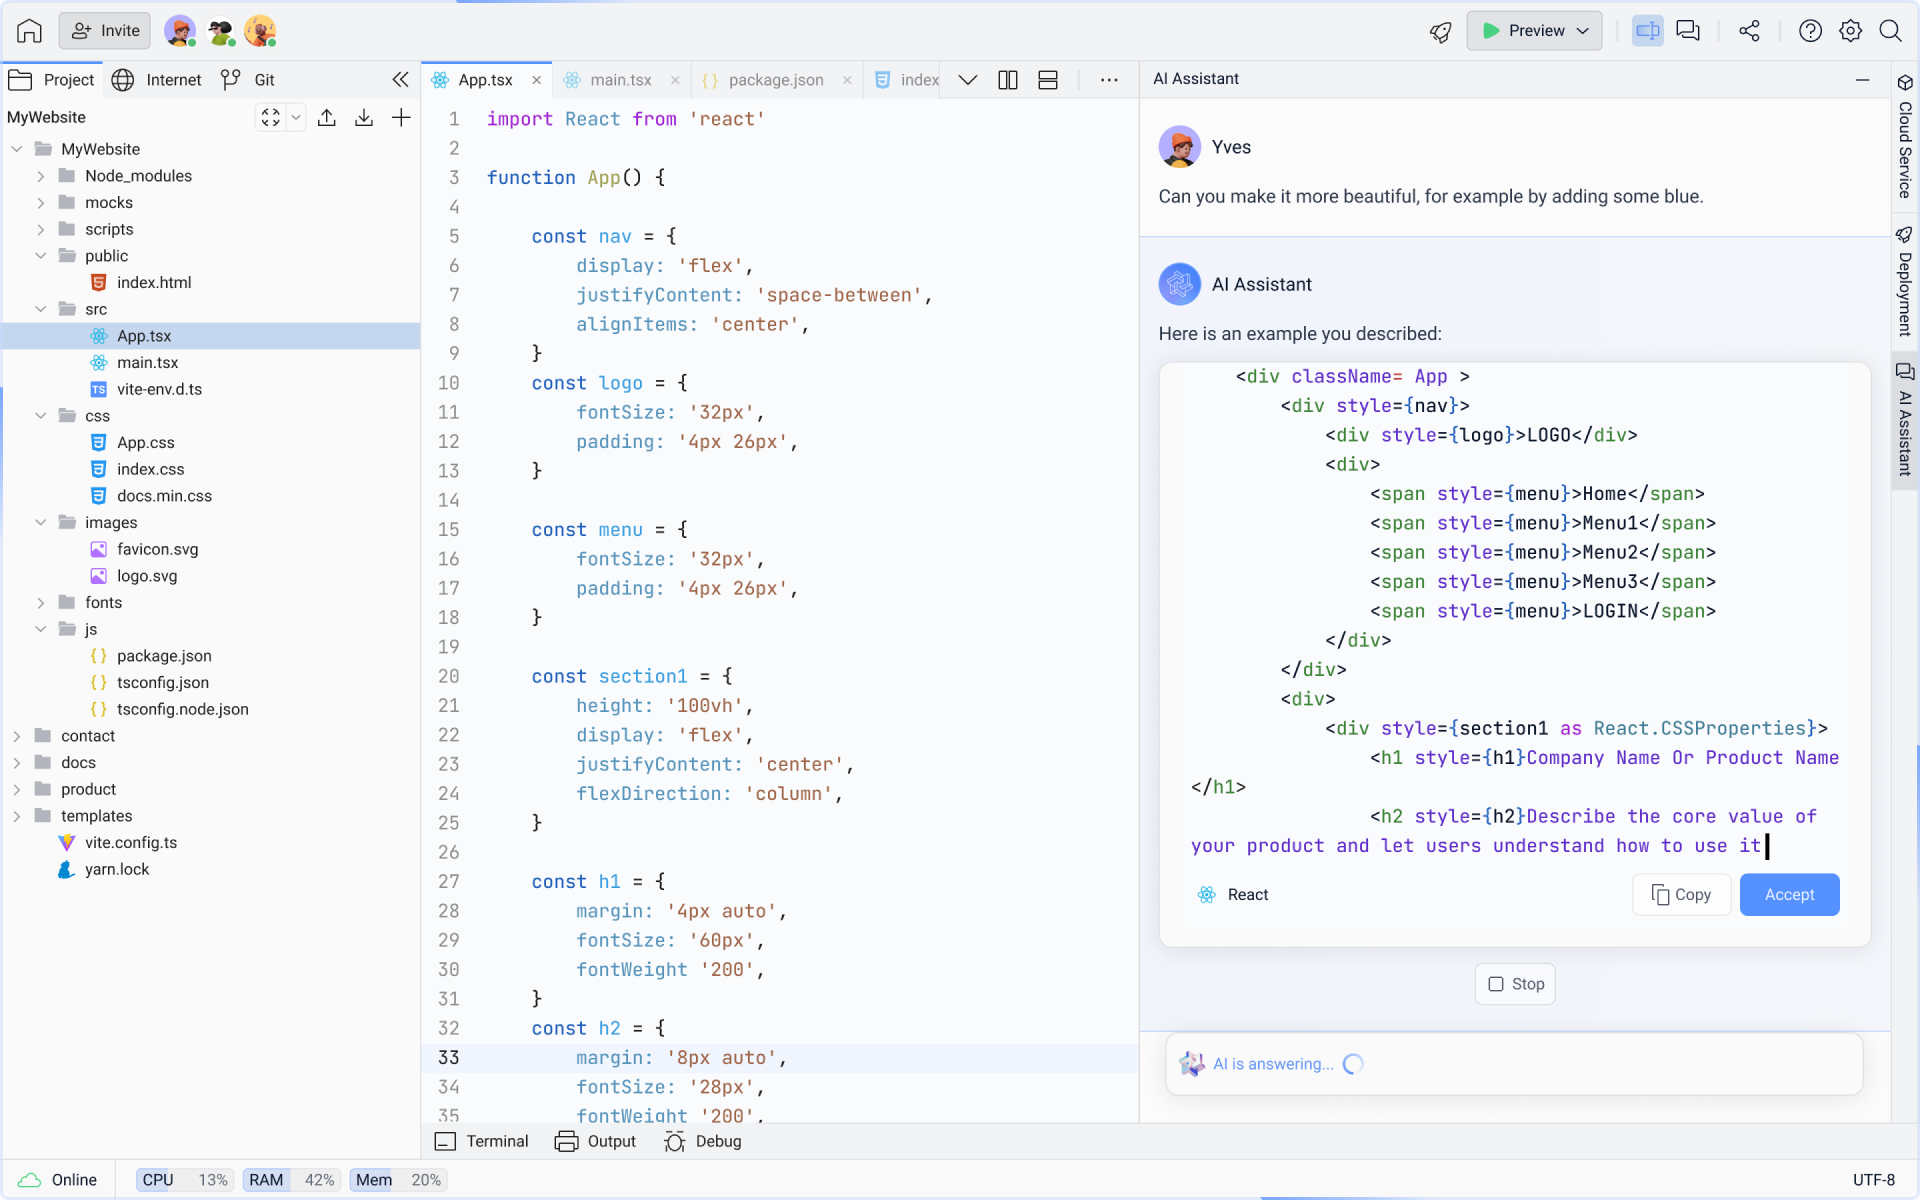 Lightly - A cloud-based IDE to code, host, collaborate and debug projects